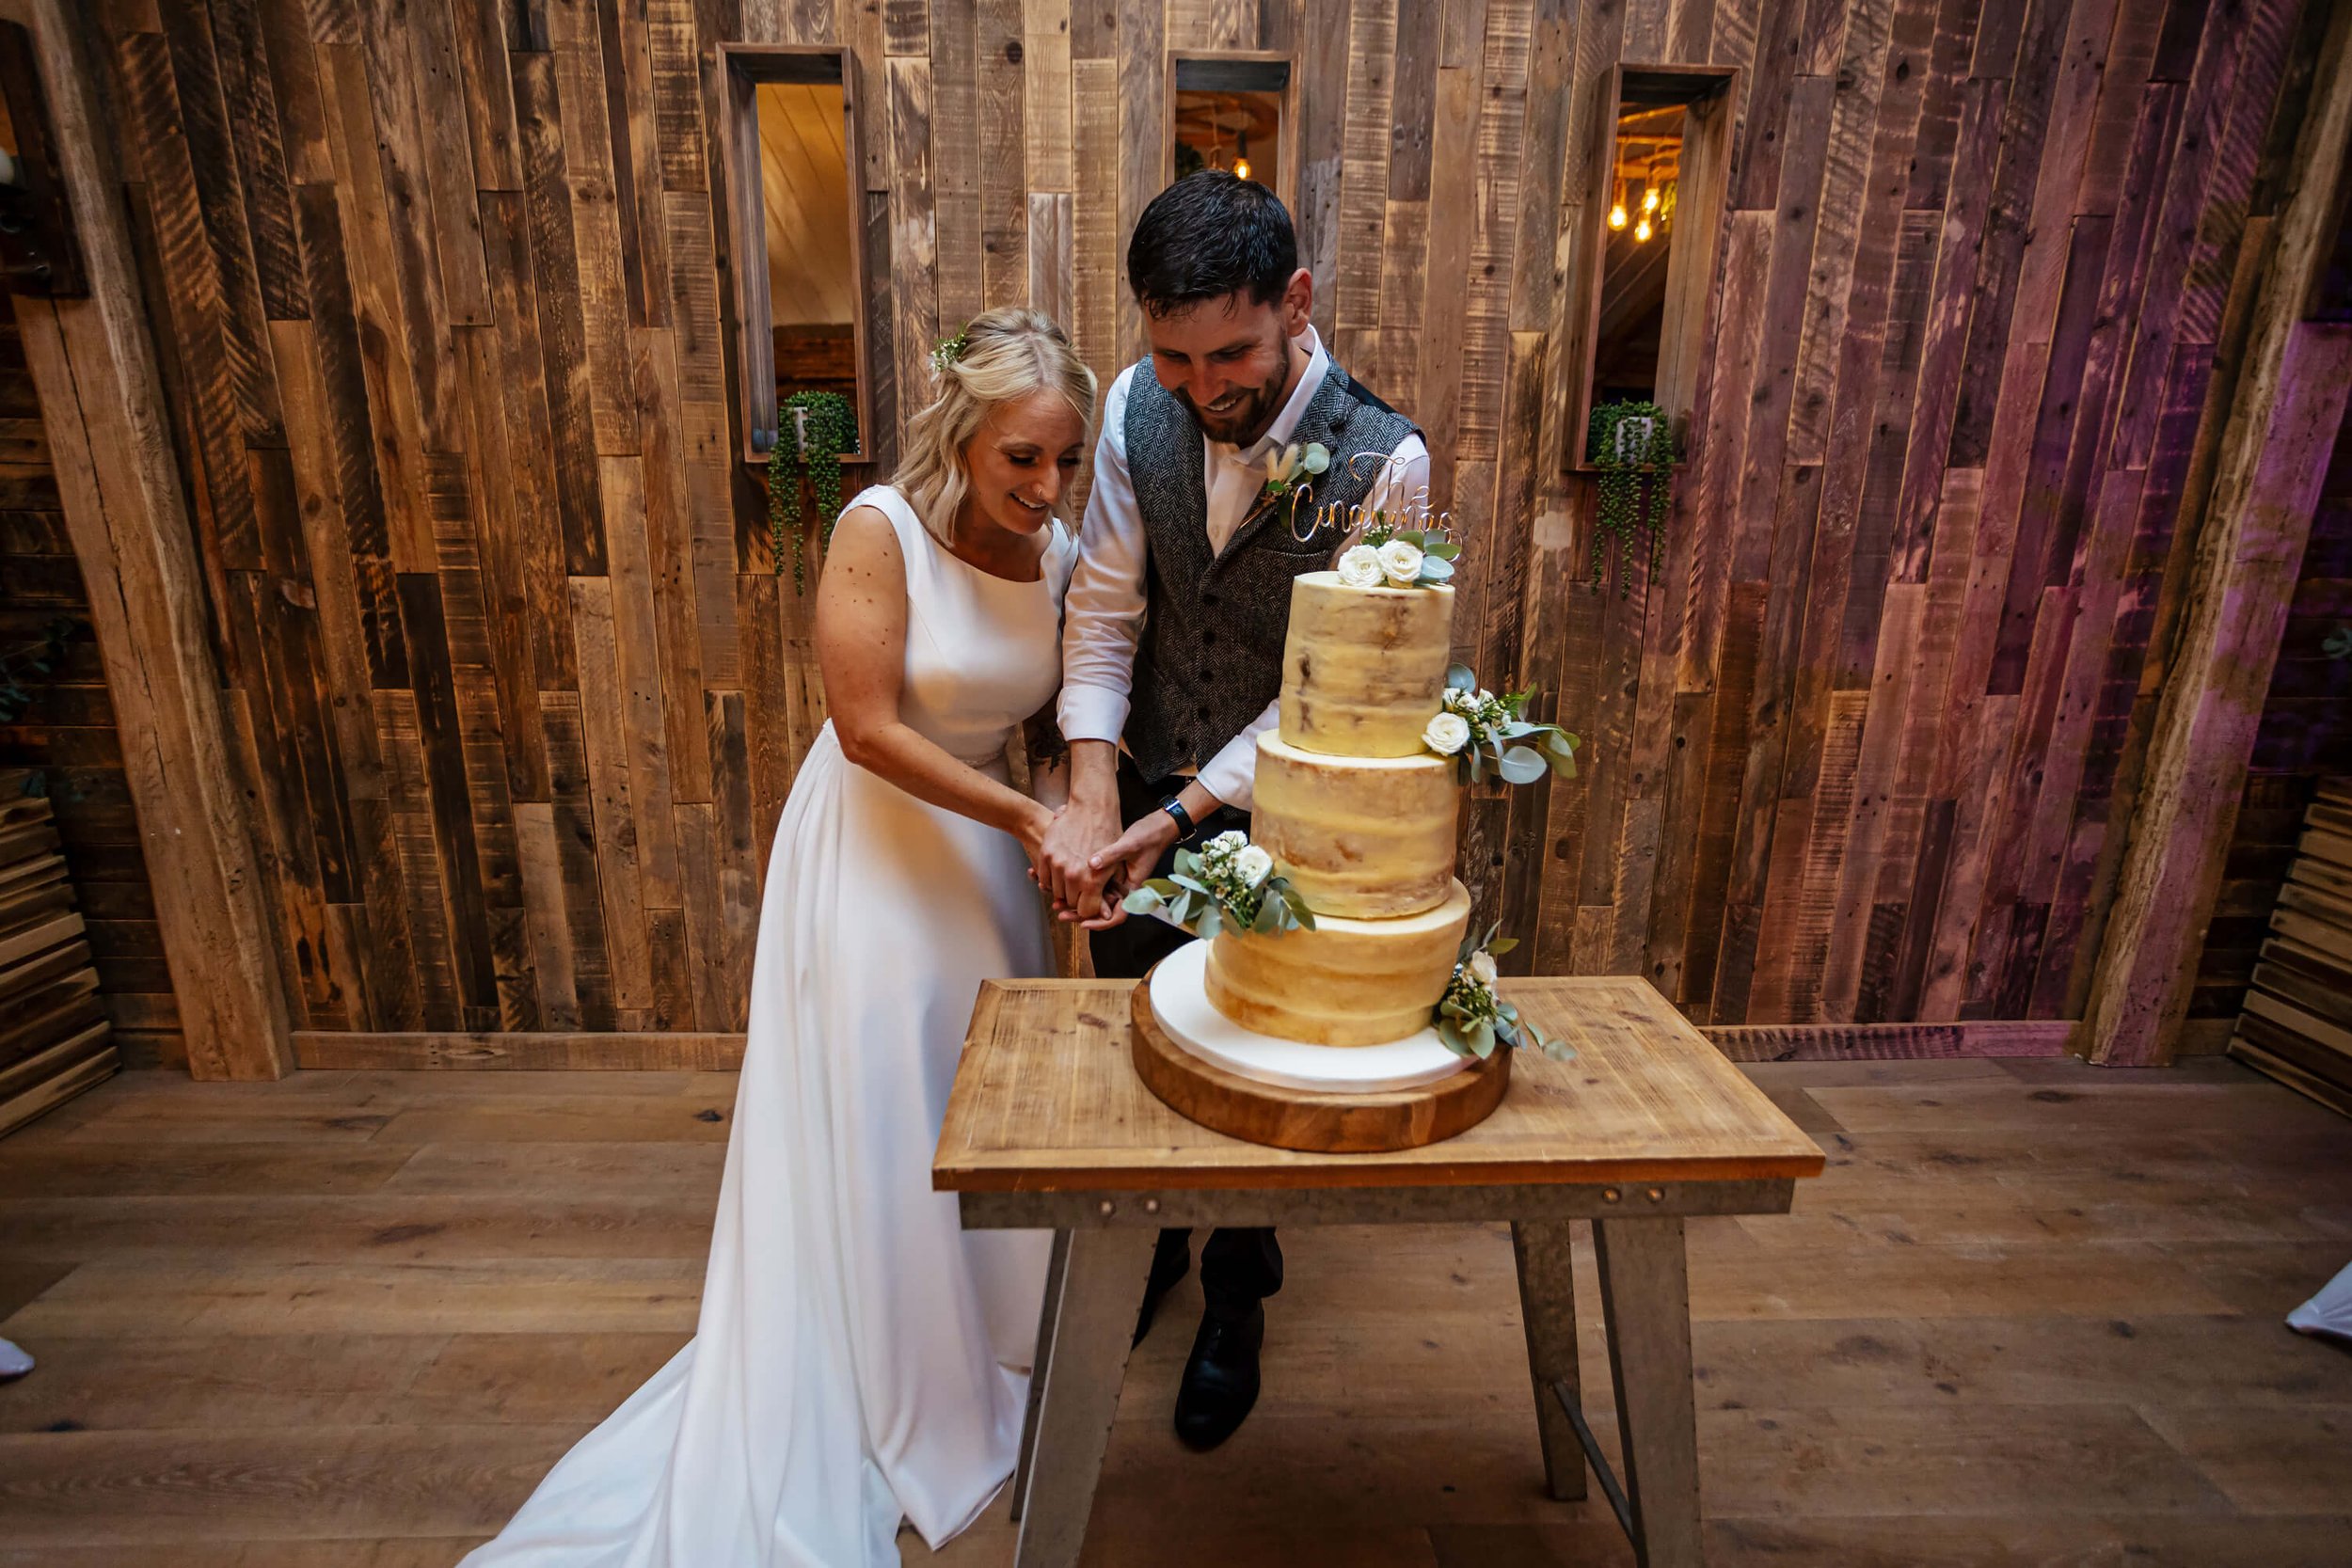 Bride and groom cut the cake at the wedding